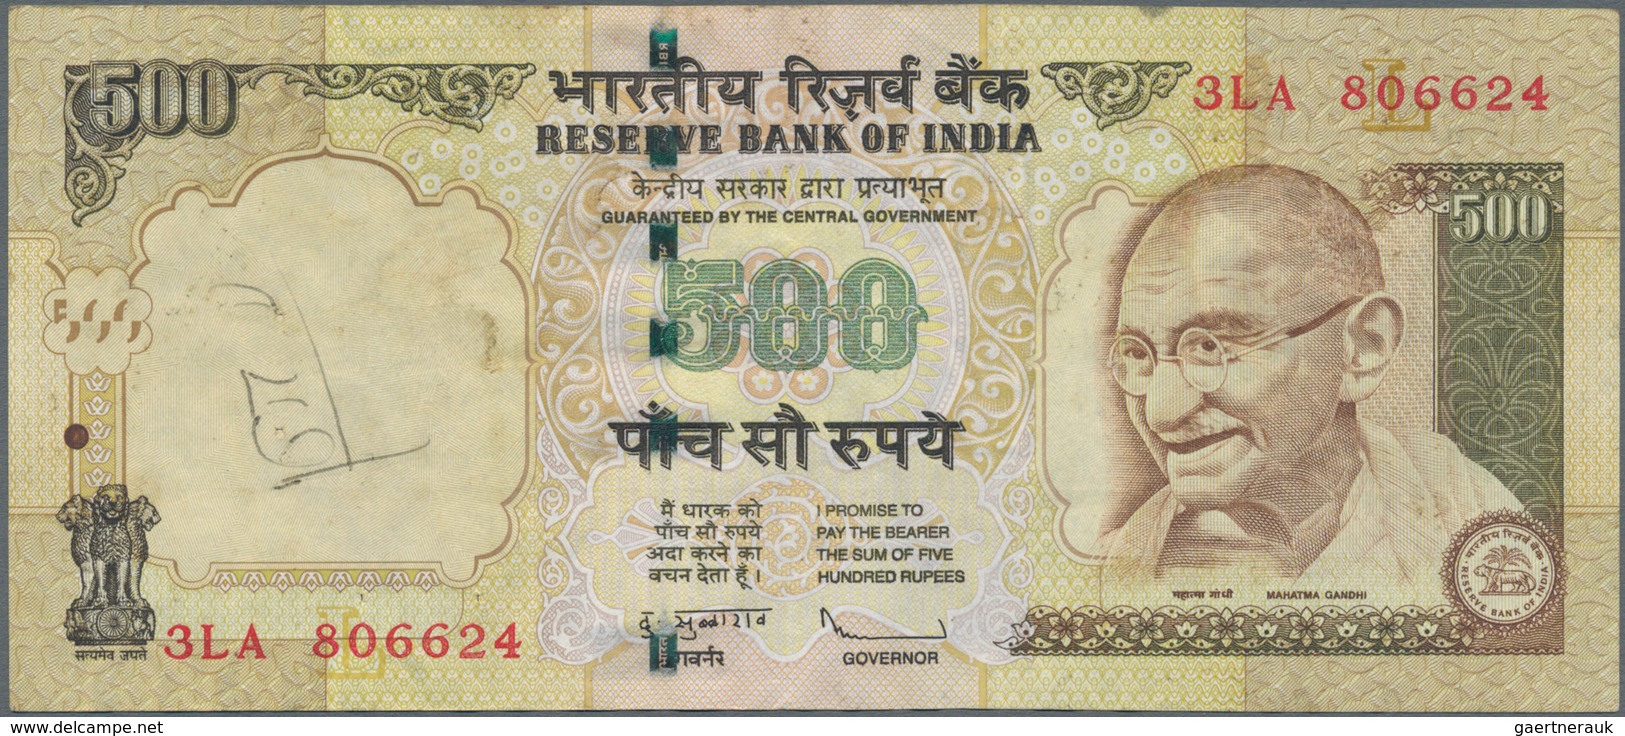 India / Indien: 500 Rupees ND P. 99 Error Note With Inverted And Misplaced Watermark In Paper, Handl - Inde